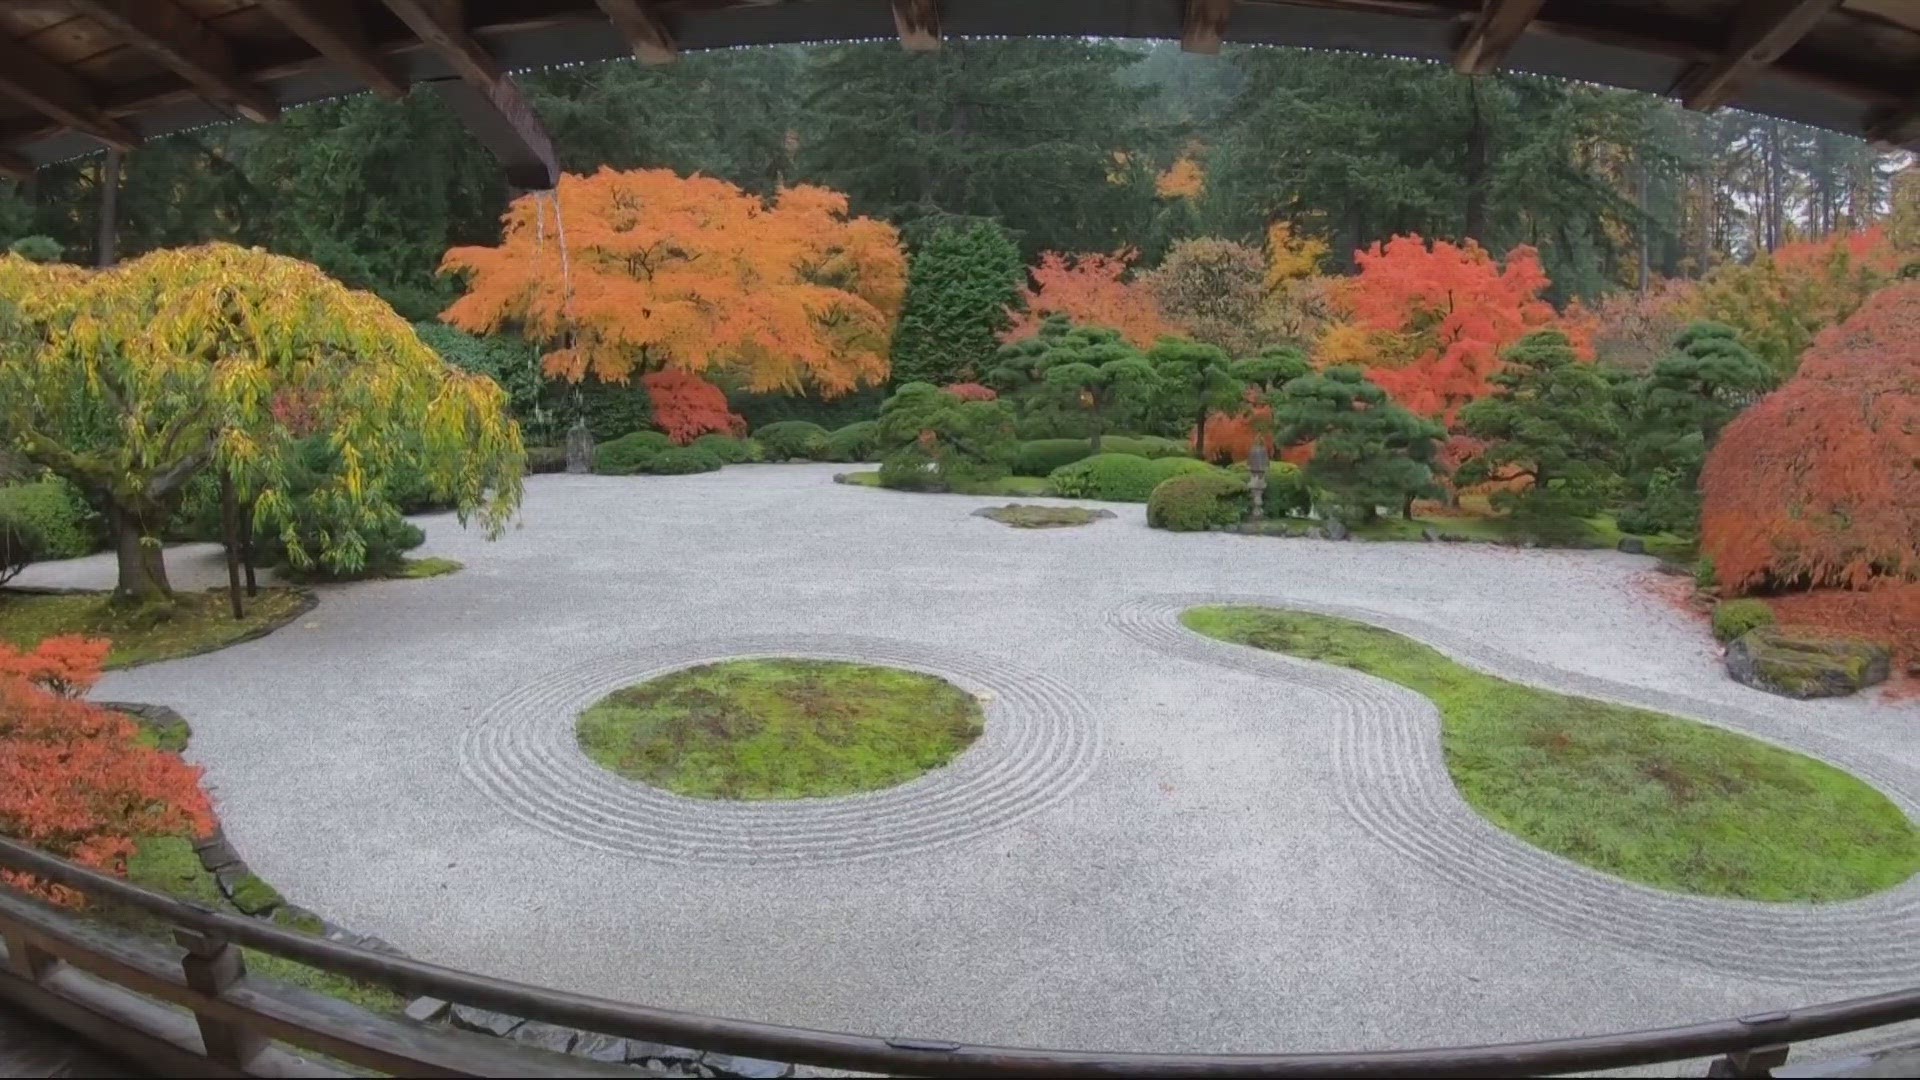 Brenda Braxton speaks with the CEO of the Portland Japanese Garden on celebrating 60 years of operation. They've announced they're spreading their mission globally.